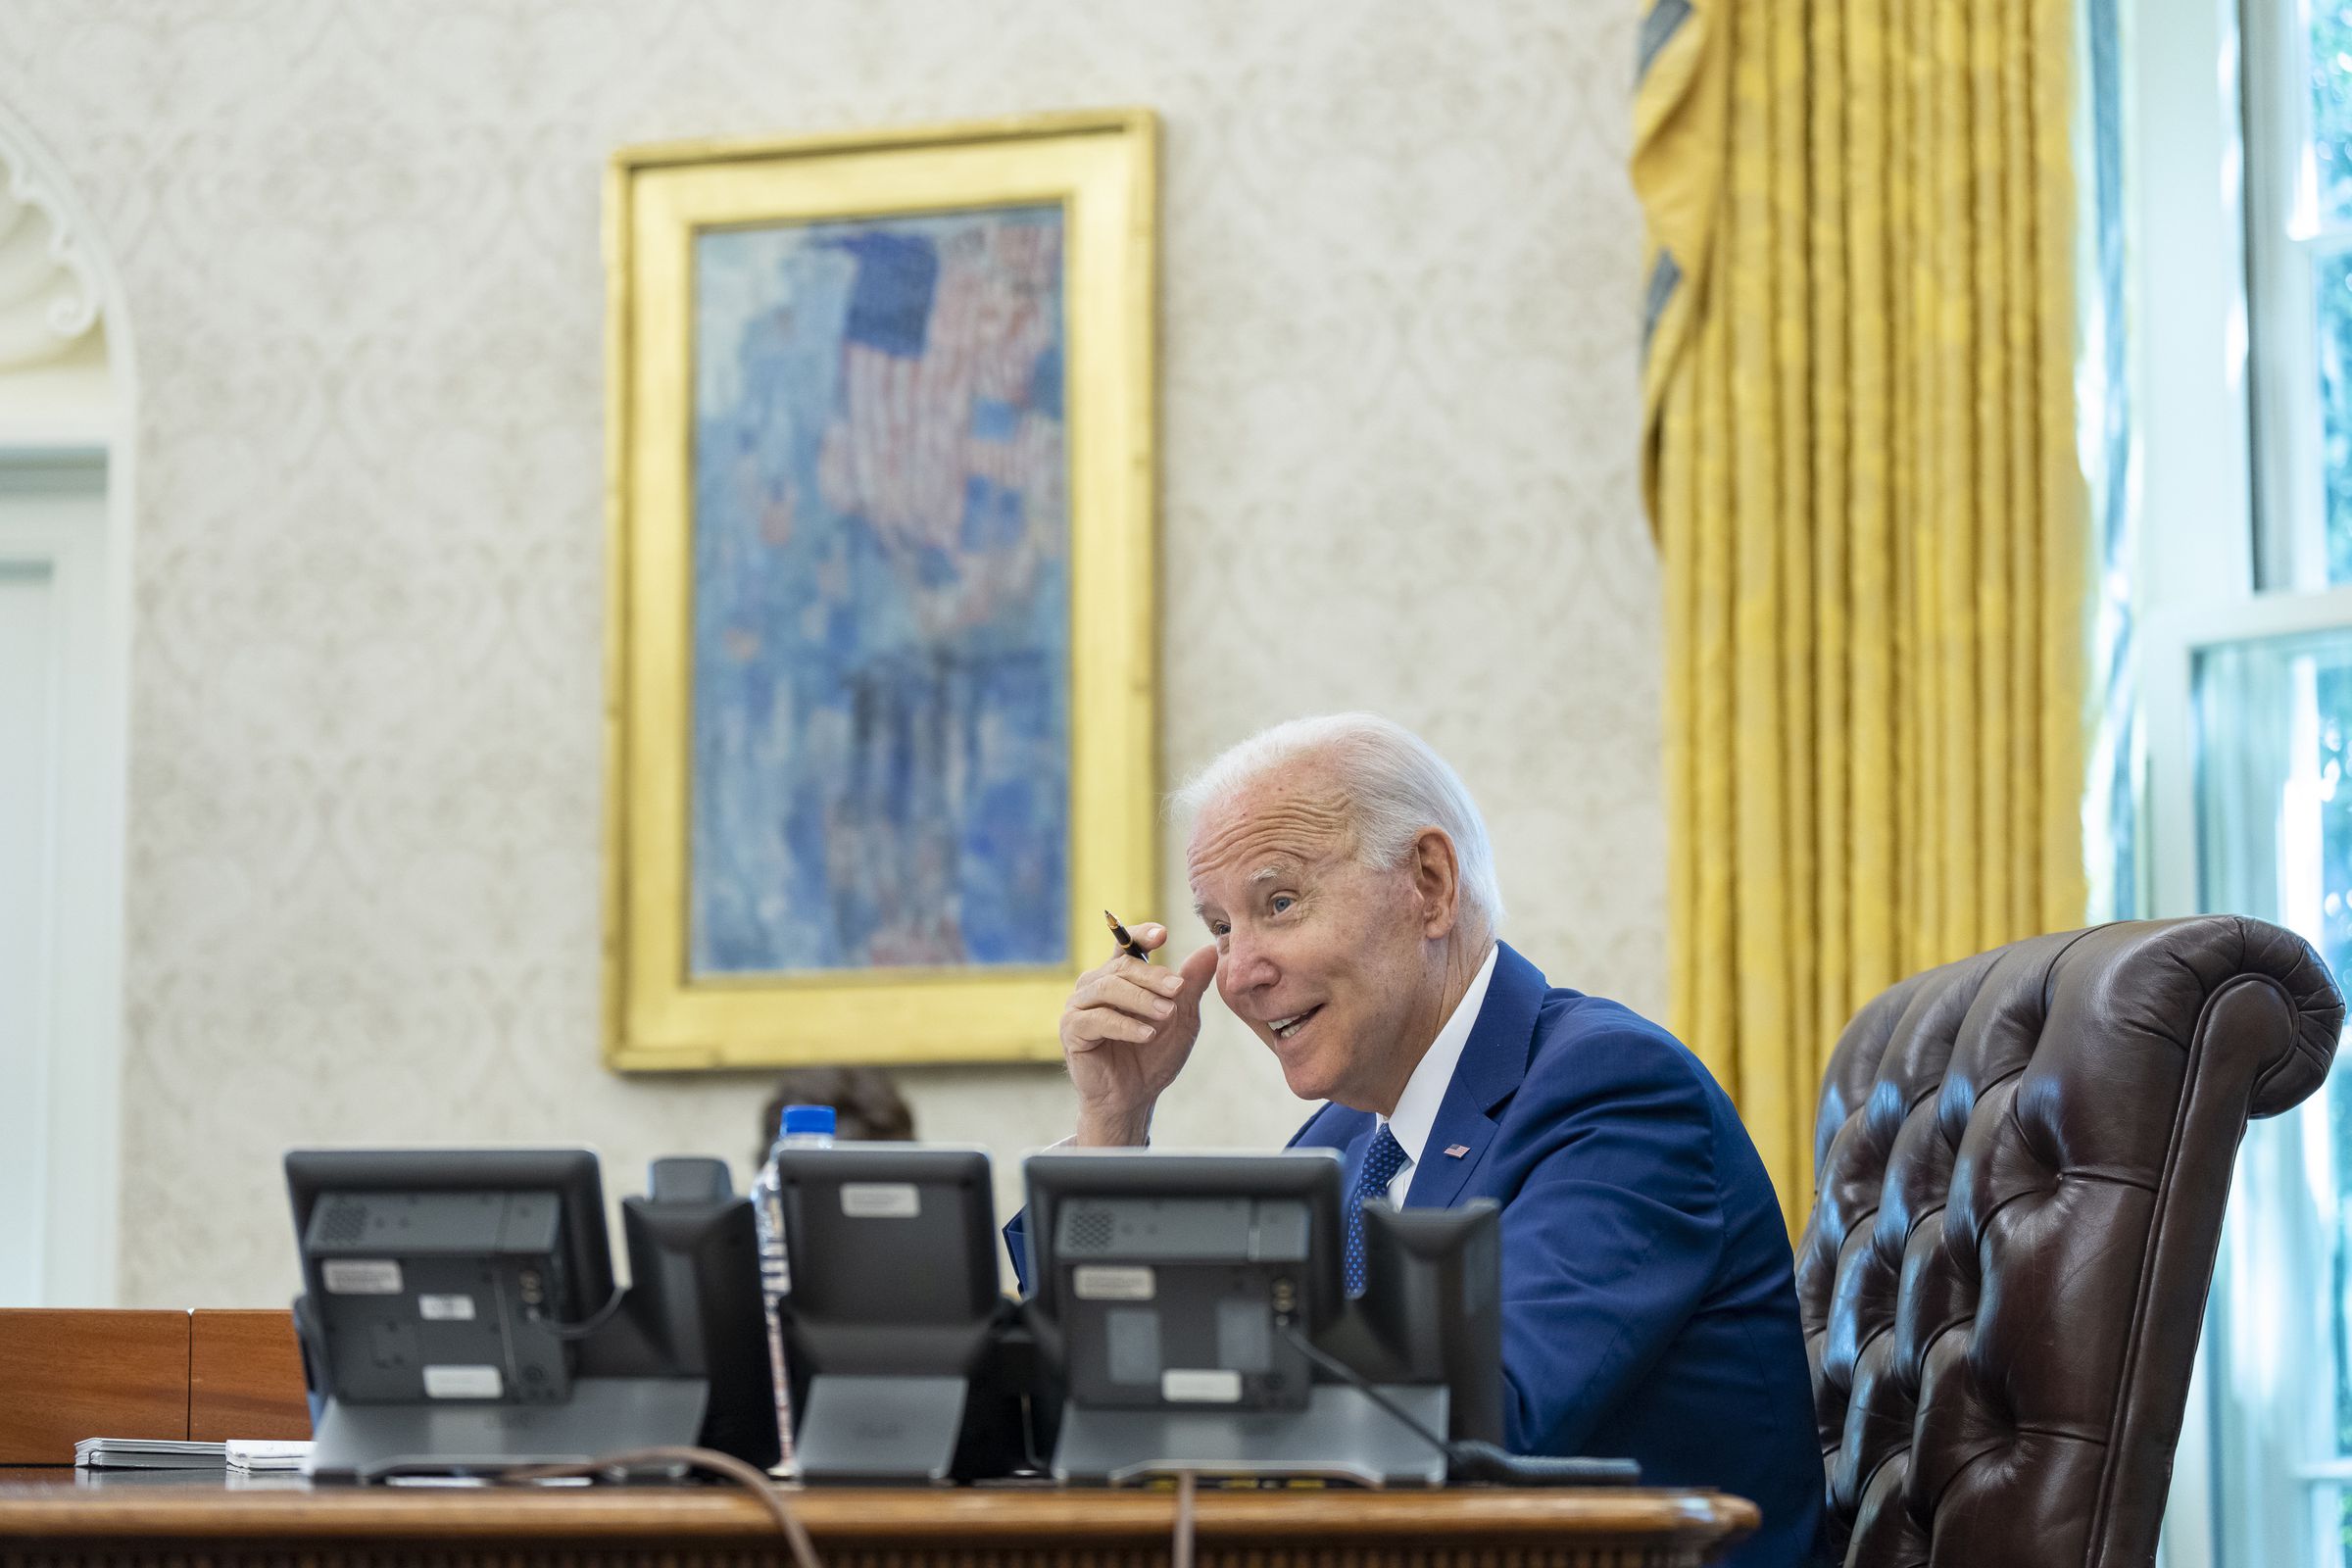 President Joe Biden sits smiling at a desk in the oval office, seen from his left behind a bank of phones.